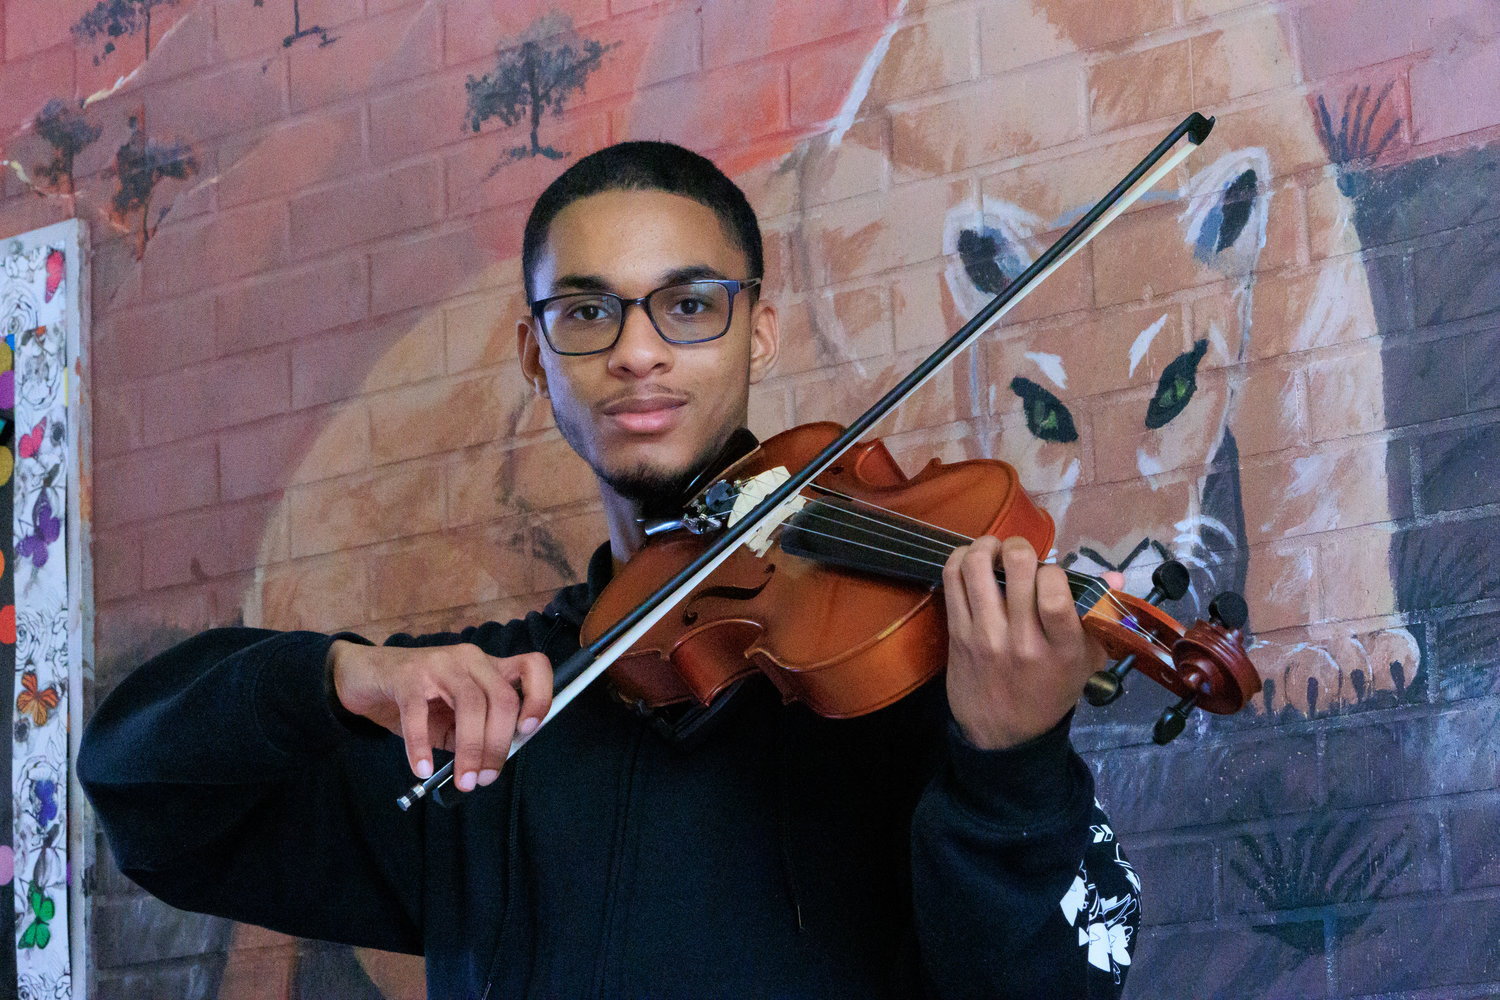 Taking up viola in the seventh grade, Miles Fowler went on to audition and become a member of youth orchestras.